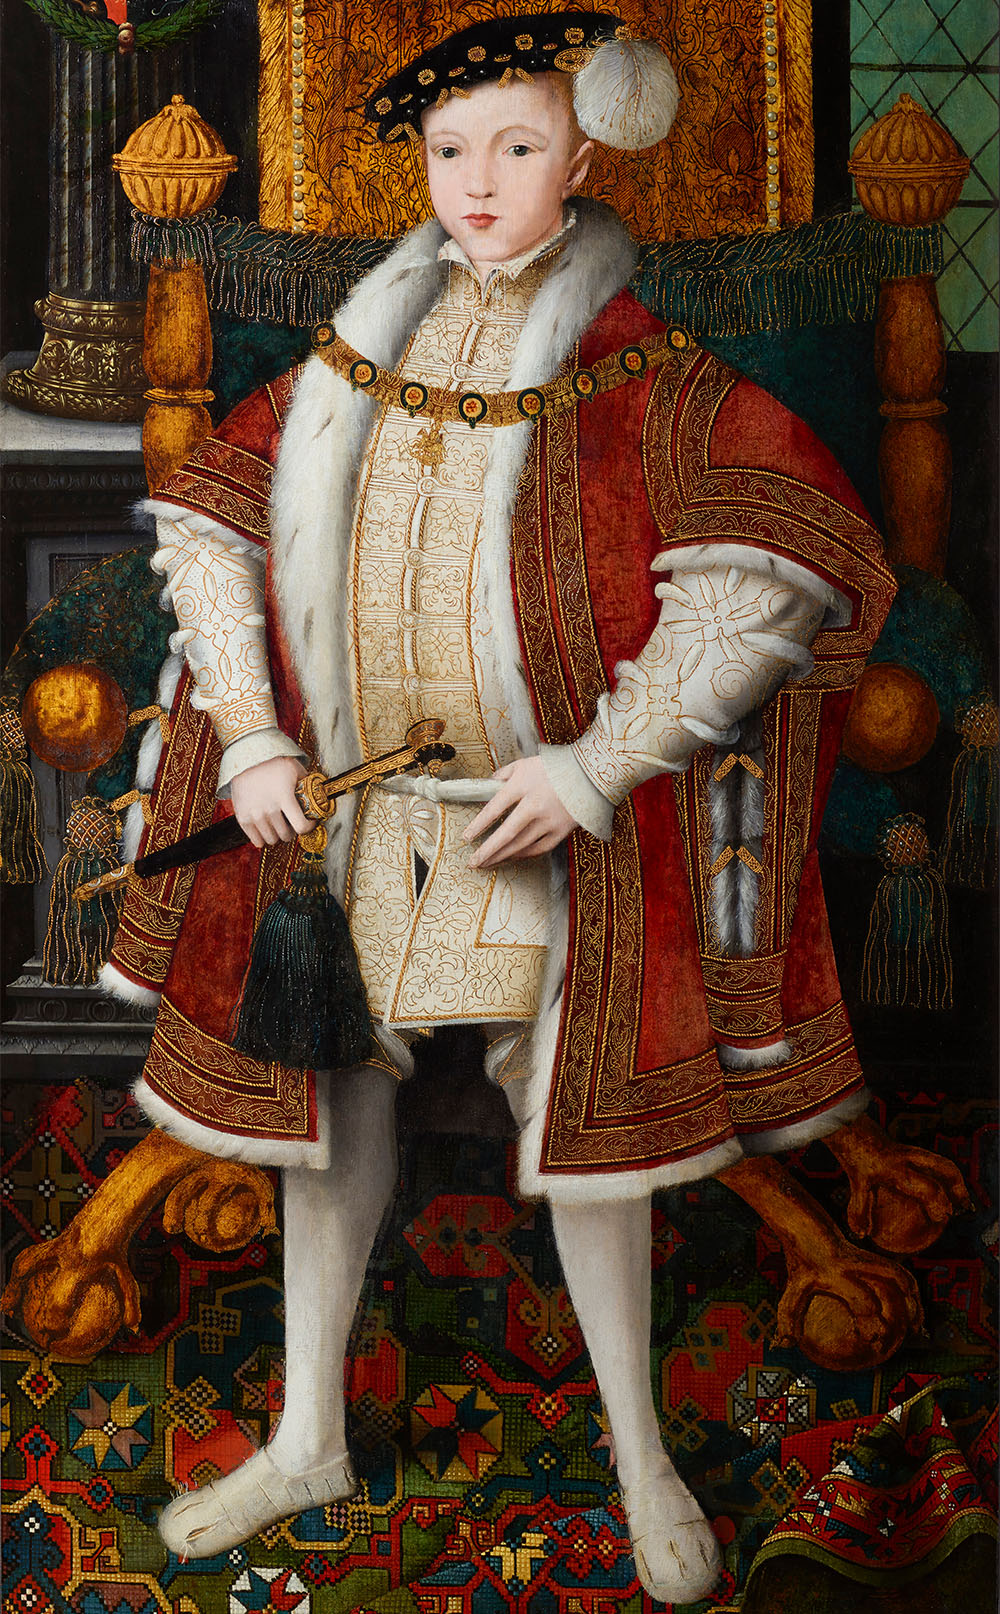 Portrait of Edward VI, workshop associated with ‘Master John’, ca. 1547. Oil on panel. National Portrait Gallery, London and honeysuckle, with the cipher ‘HA’ for Henry VIII and Anne Boleyn. 0.38 x 2.69 m (1' 3" x 8' 10"). Burrell Collection, Glasgow Museums, 29.178a & b